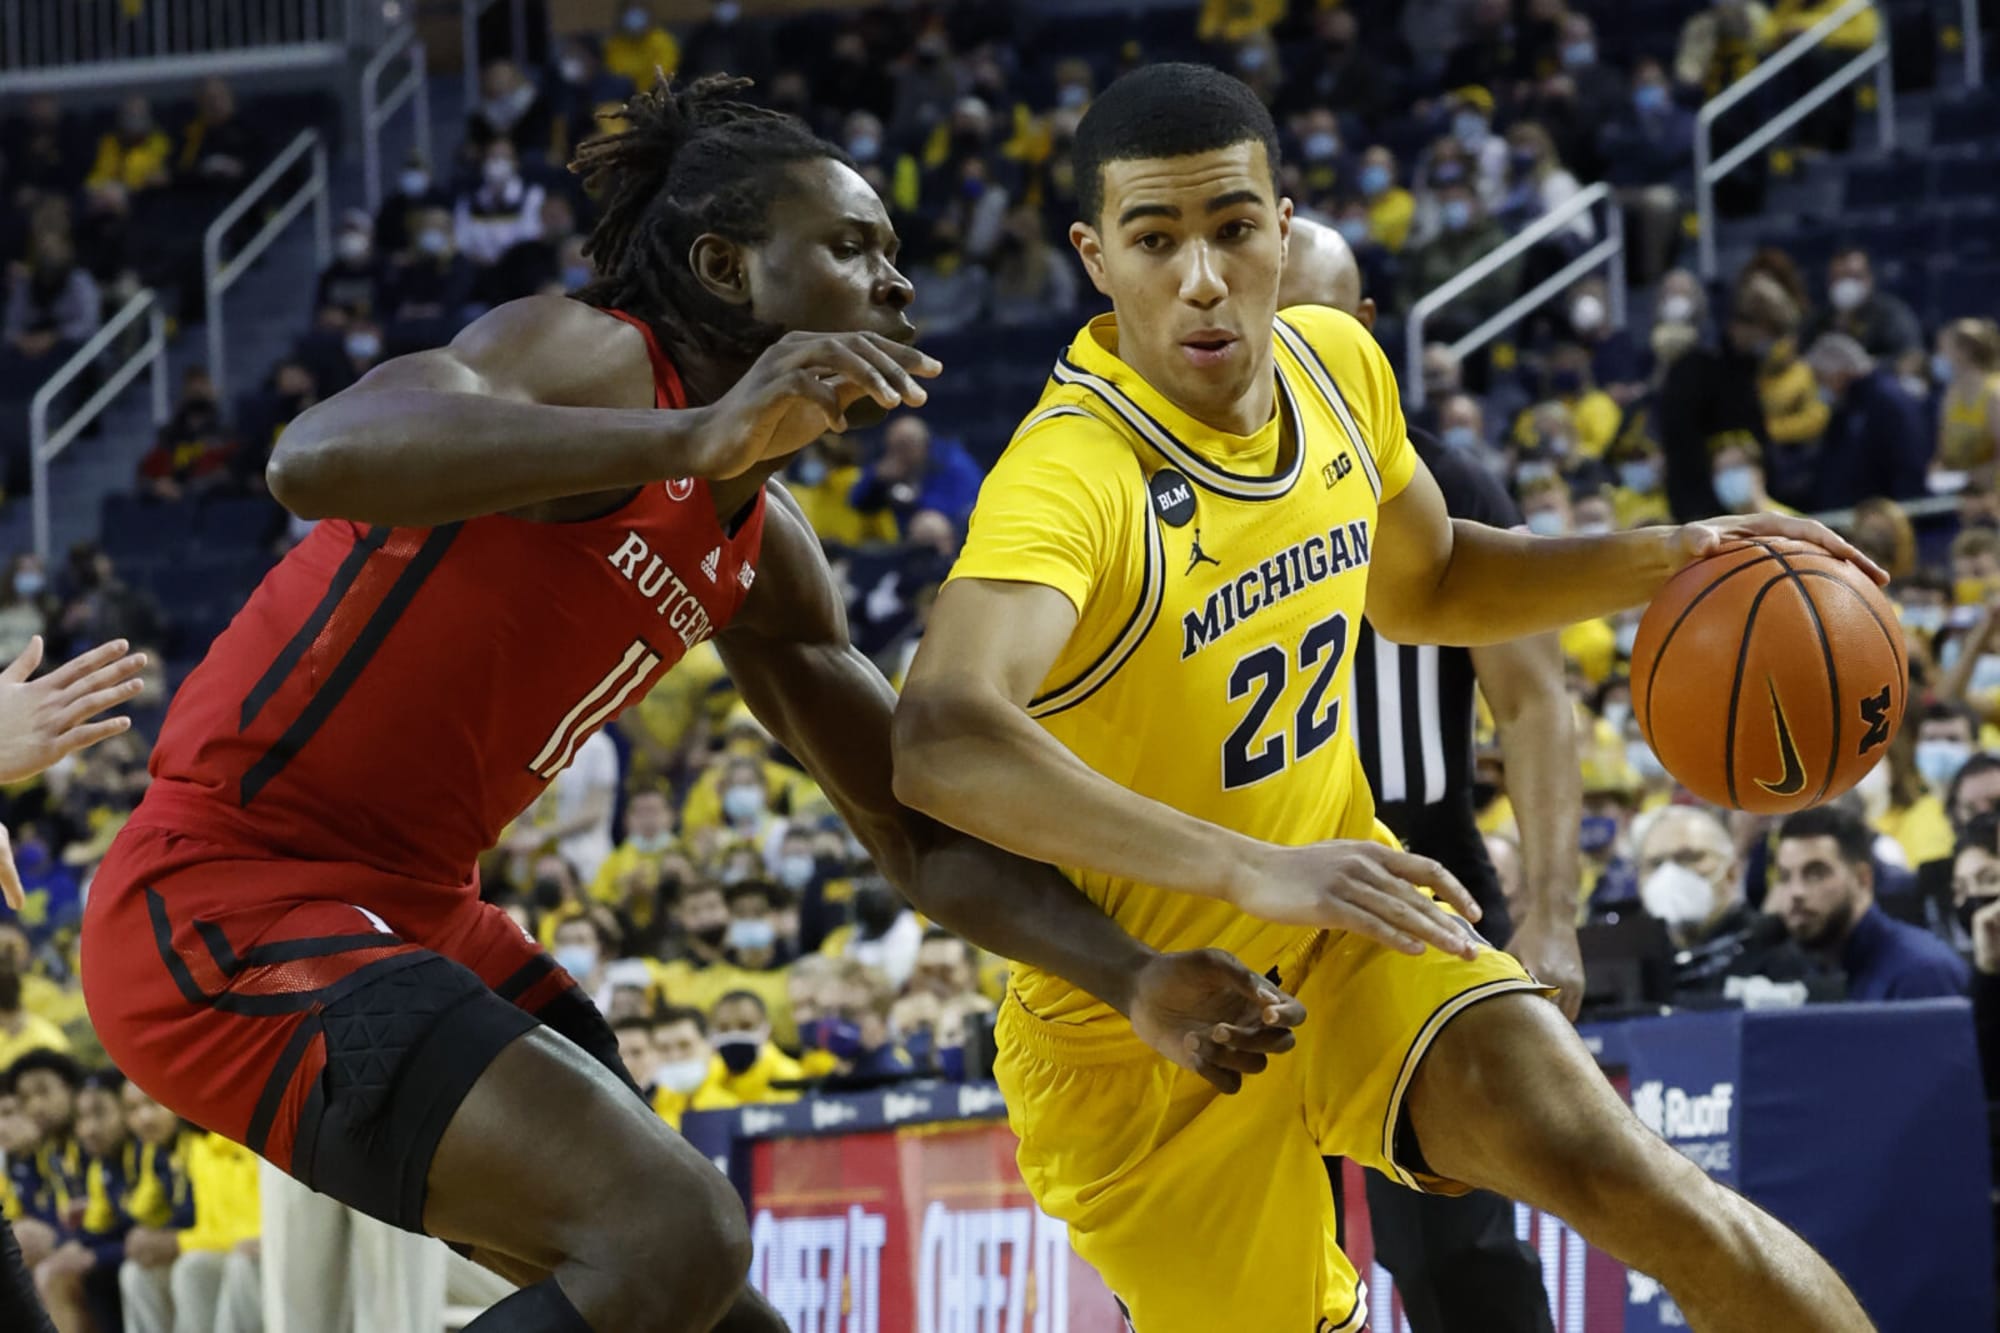 After promising rookie year, ex-Wolverine re-signs with NBA team 